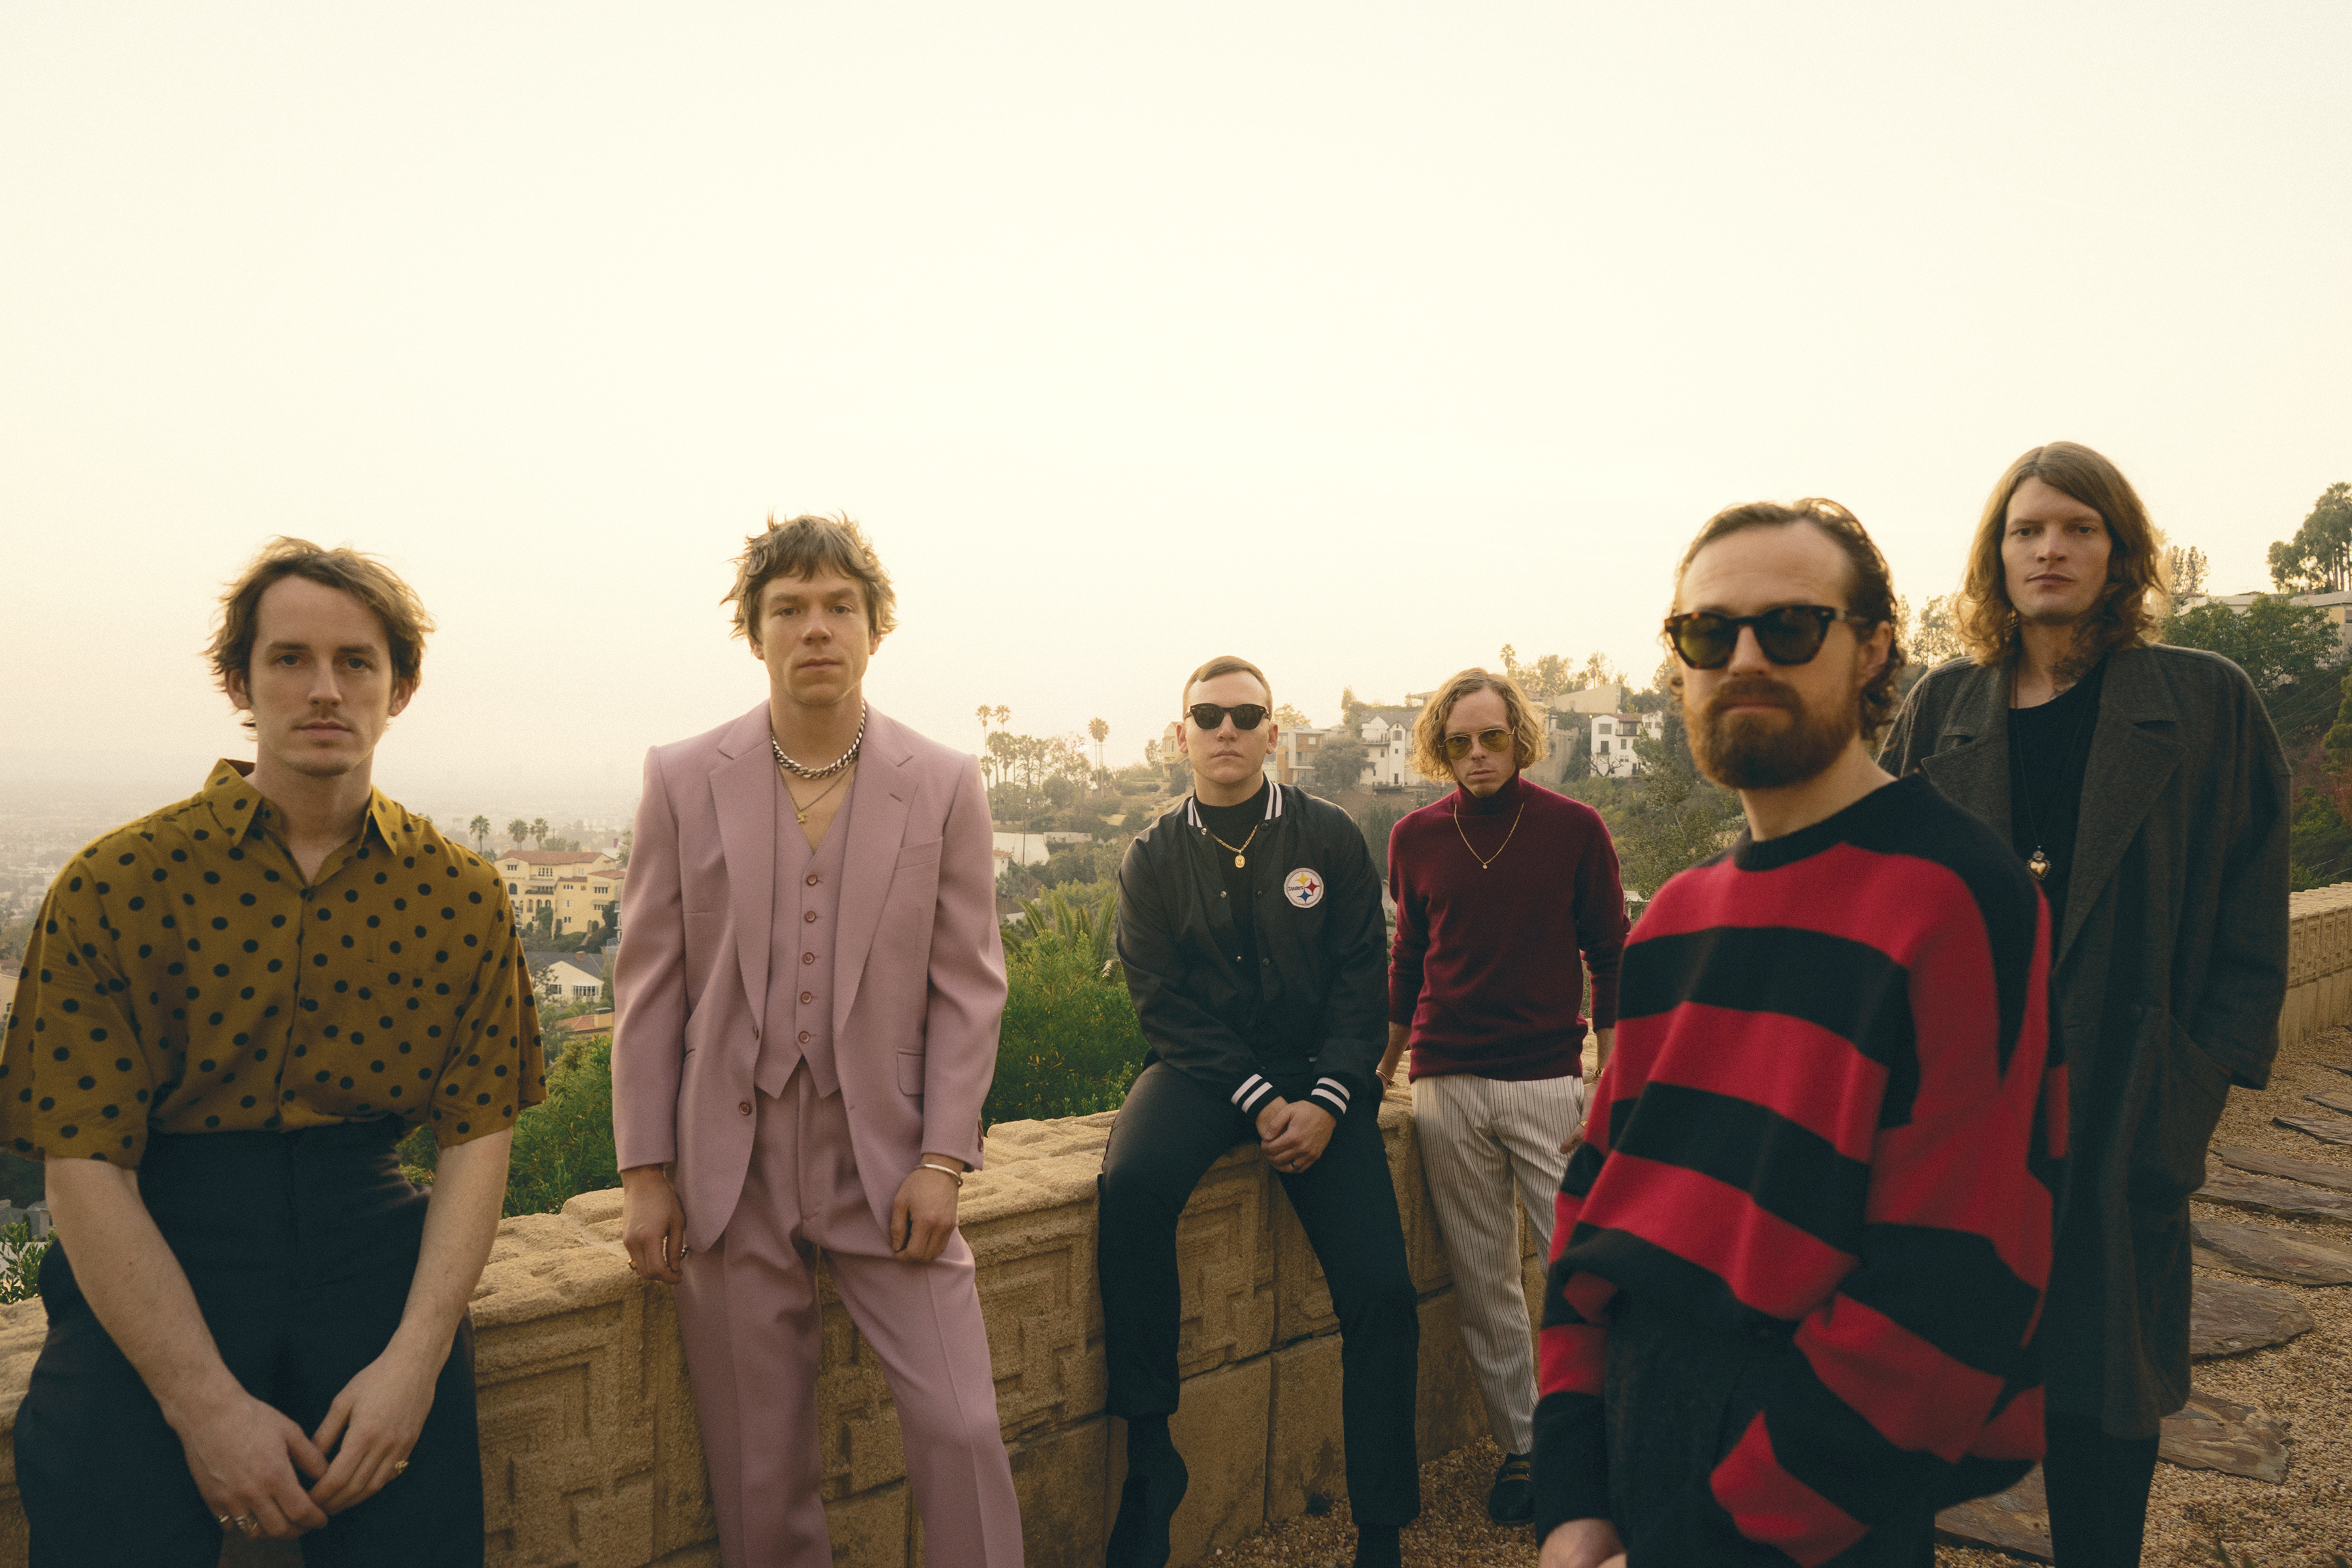 Cage the Elephant: Get Up & Get Lifted